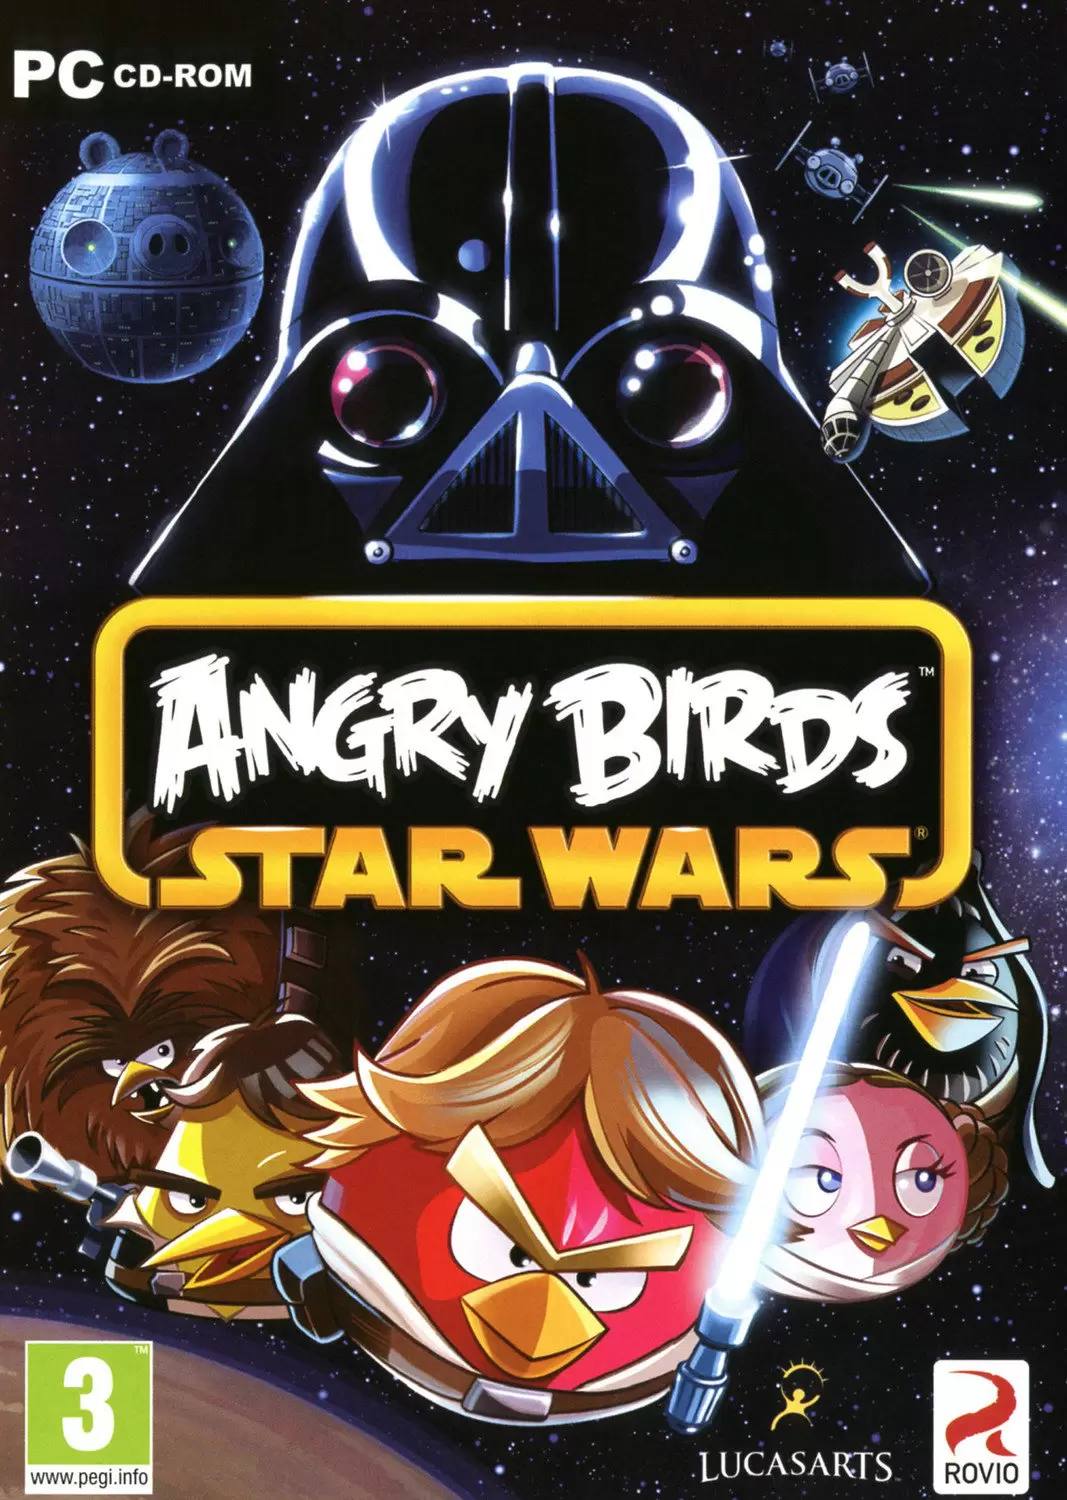 PC Games - Angry Birds Star Wars